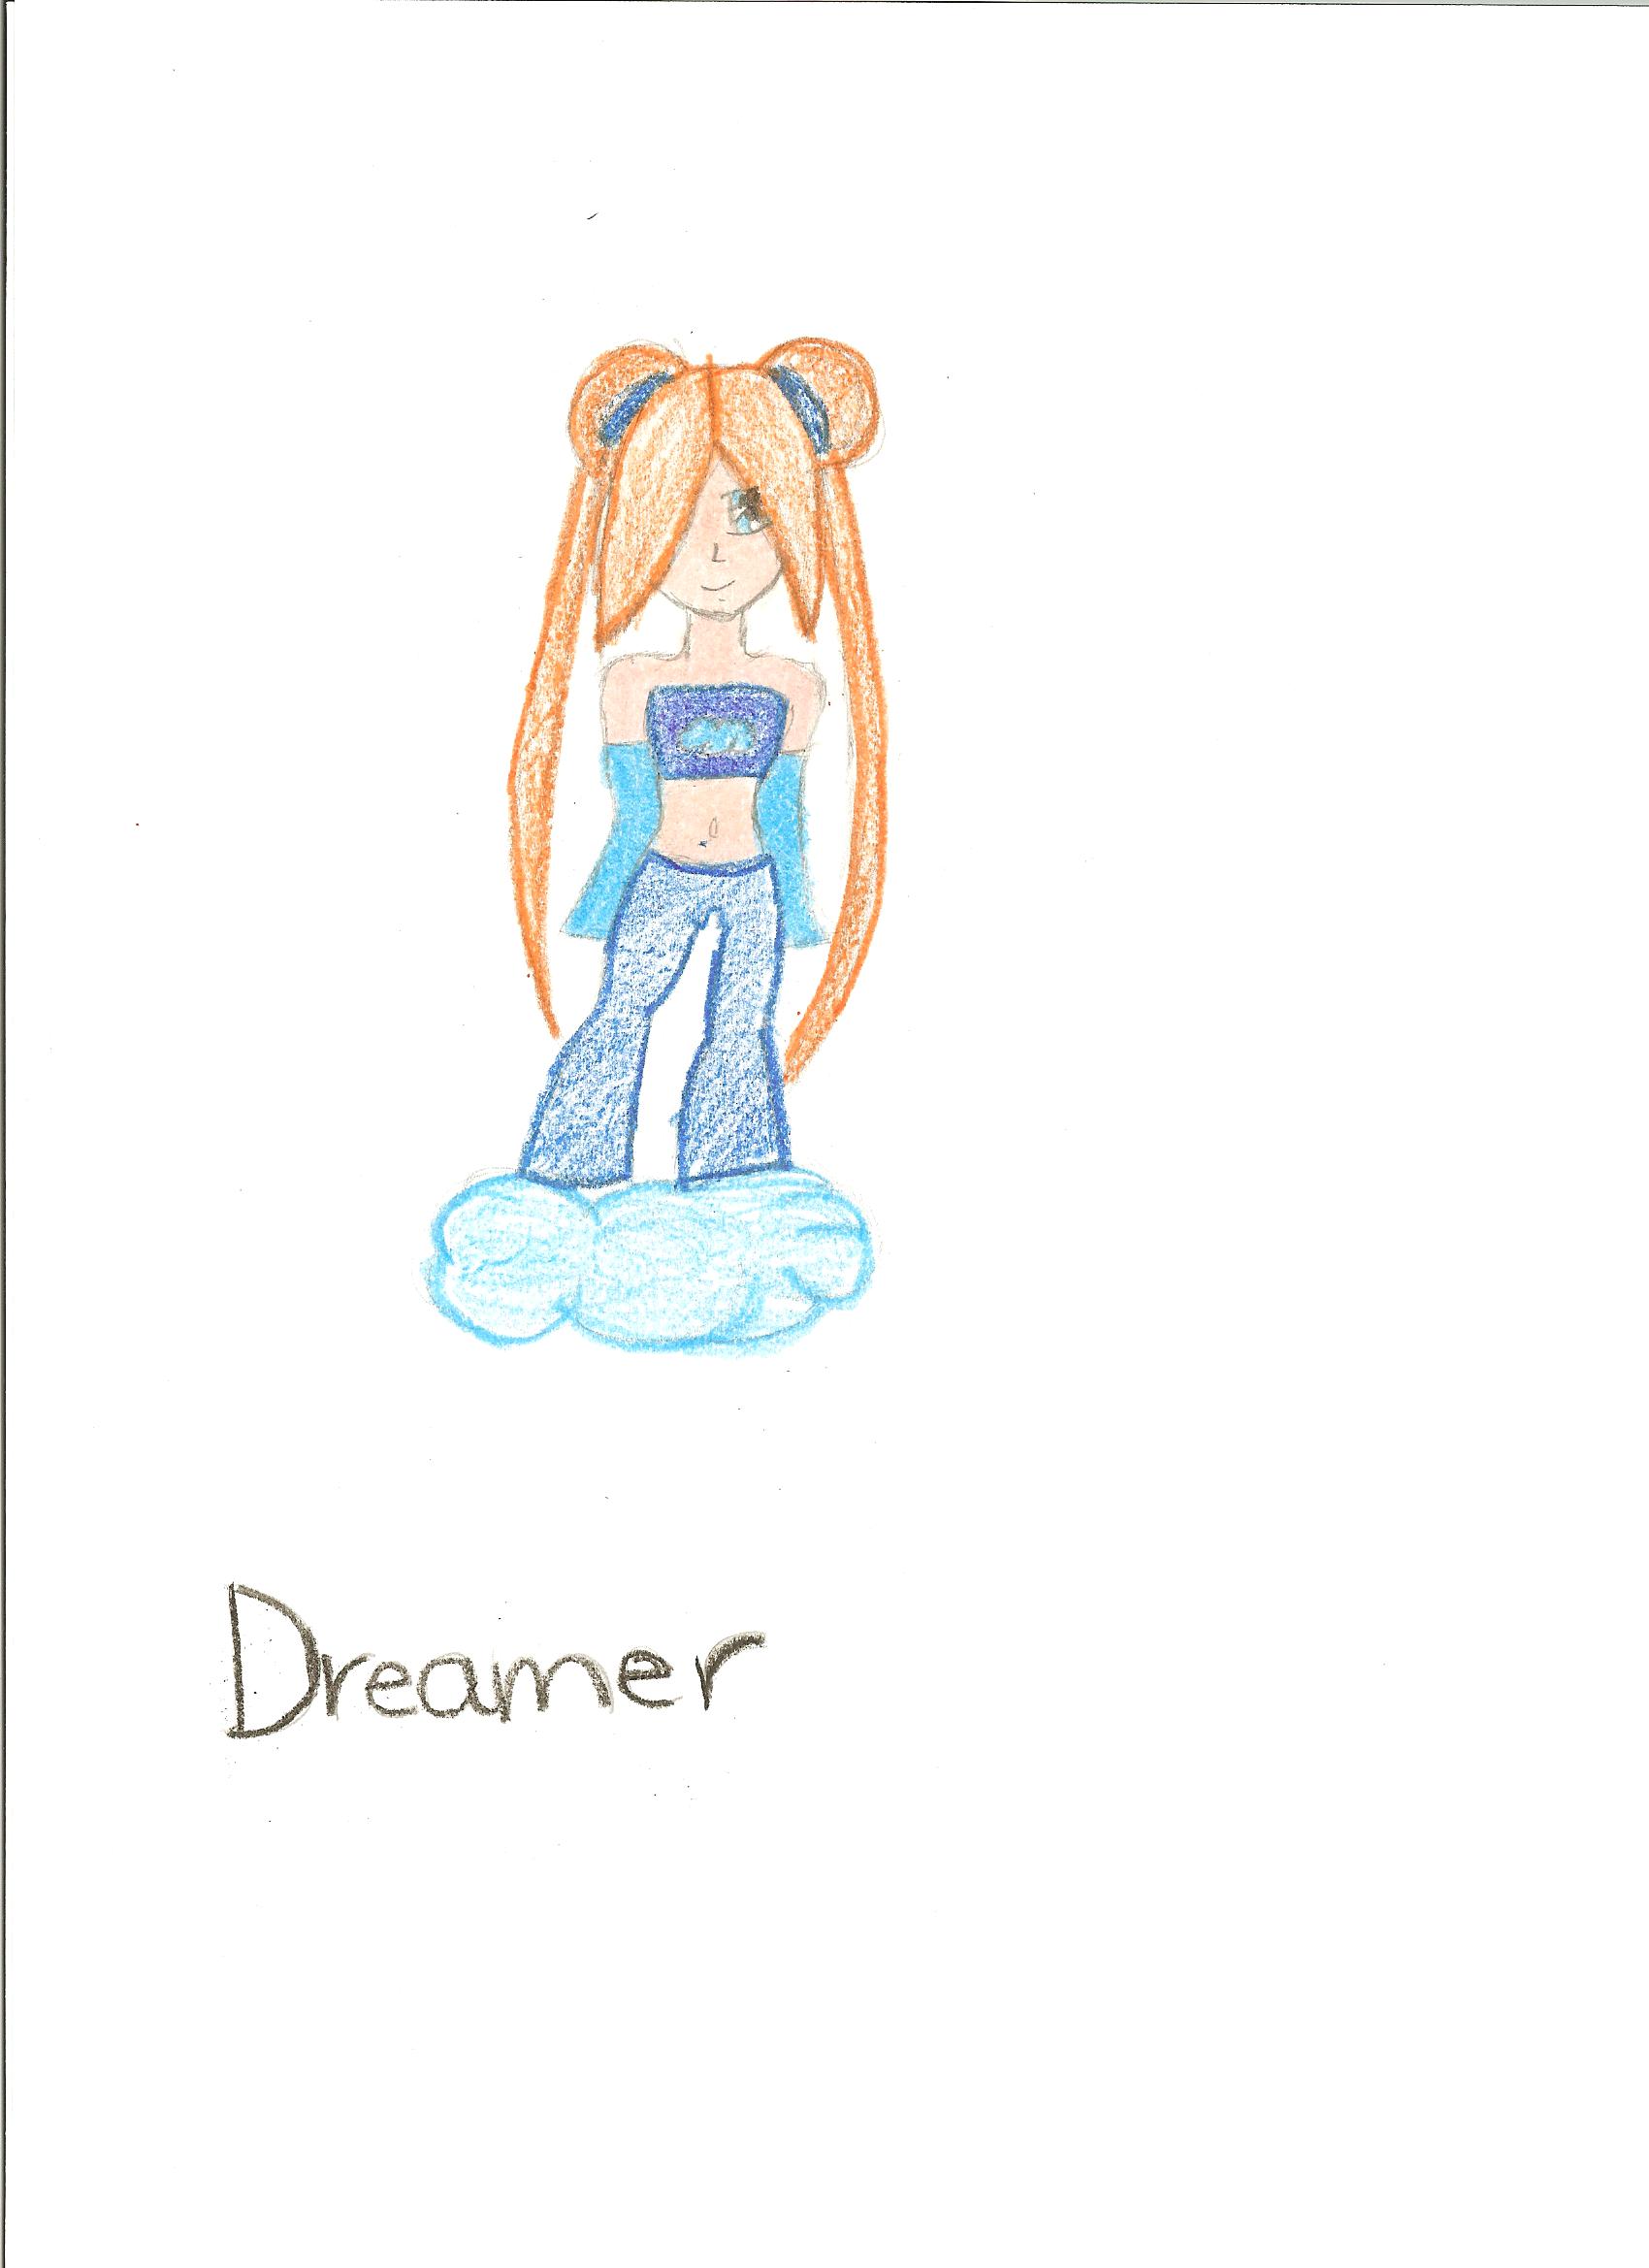 Dreamer"for winxgirl's contest by sesshy_lil_gurl